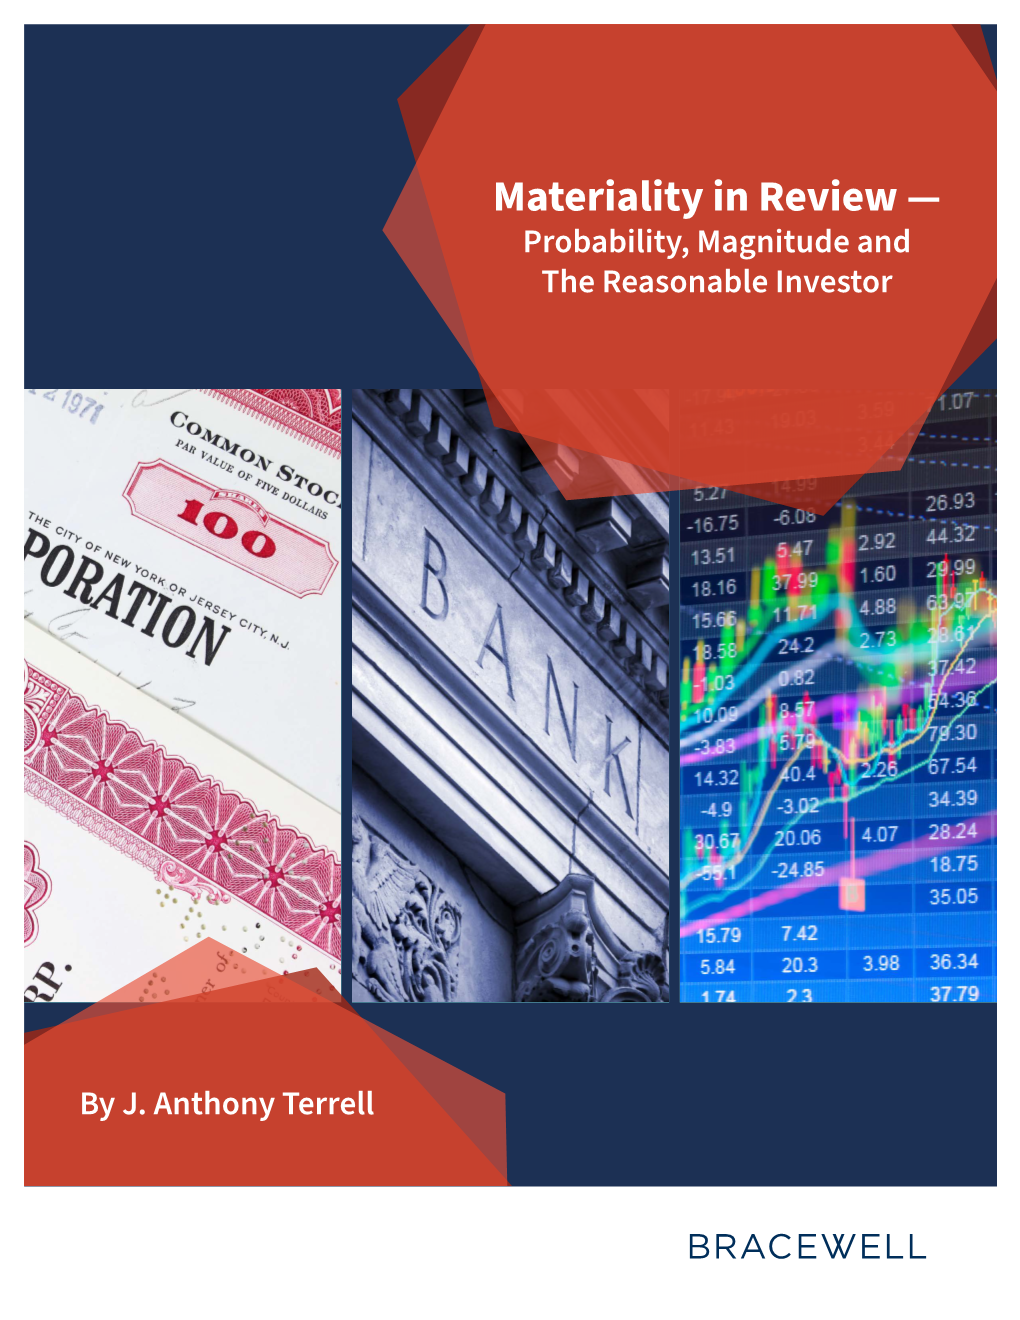 Materiality in Review — Probability, Magnitude and the Reasonable Investor